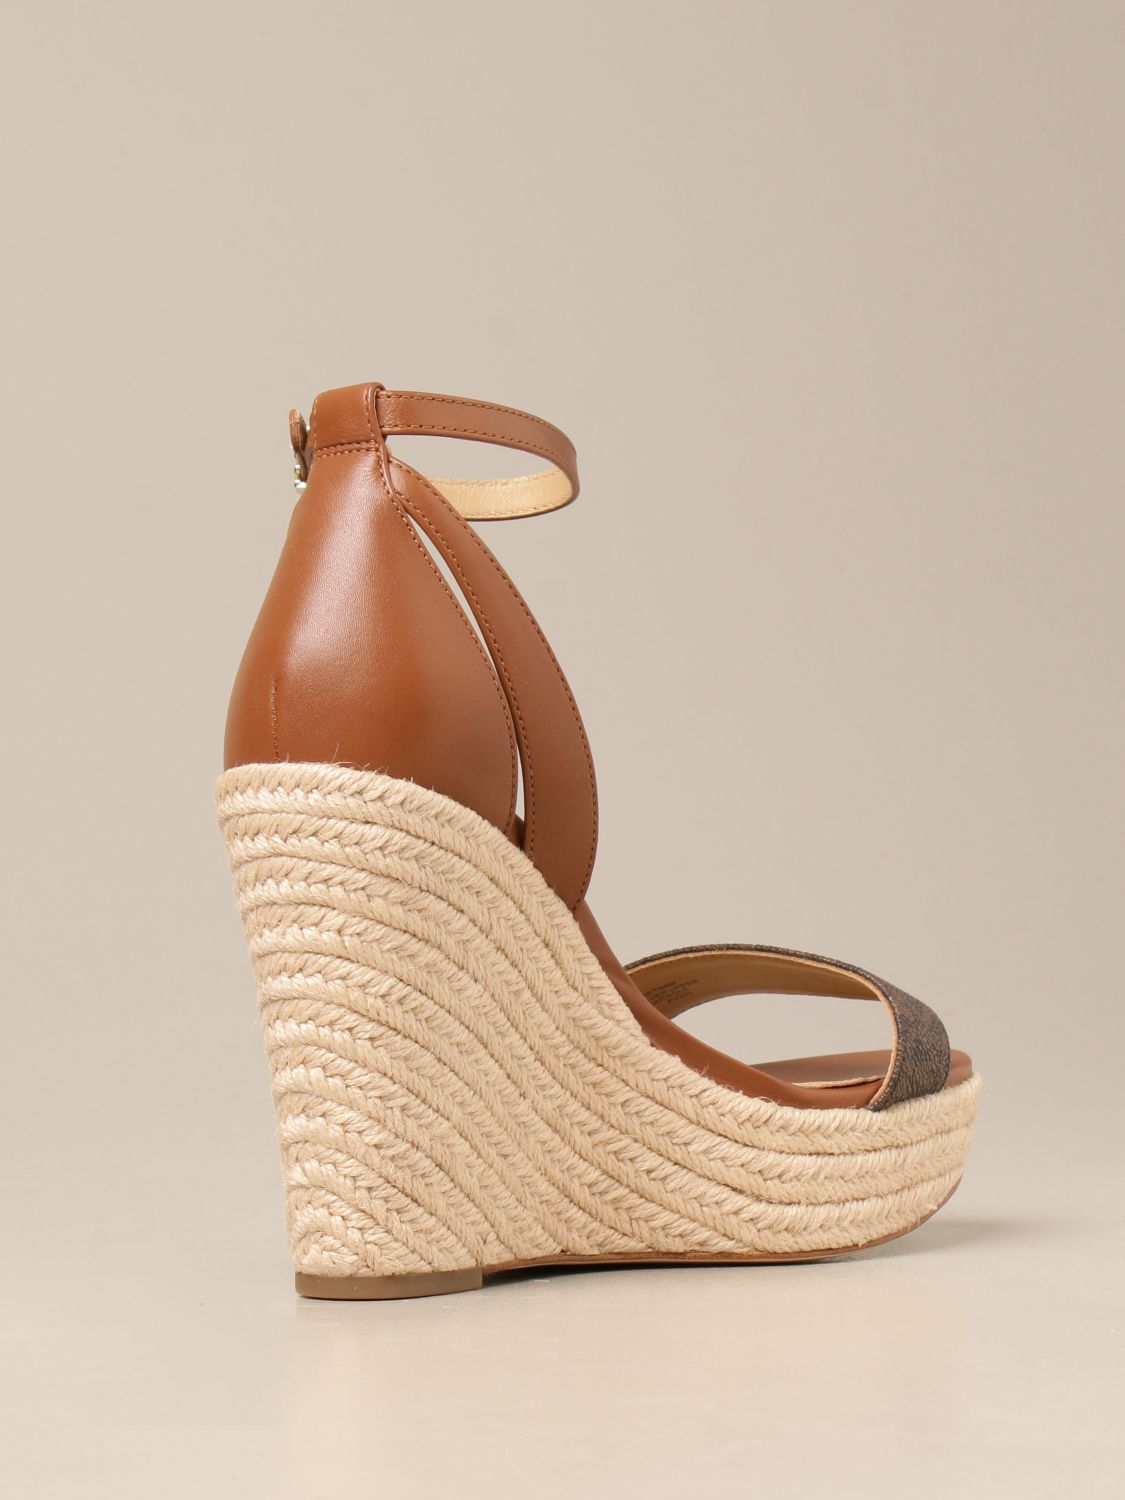 MICHAEL KORS: Michael wedge sandals in leather - Brown | Michael Kors wedge  shoes 40S1KBHS6L online on 